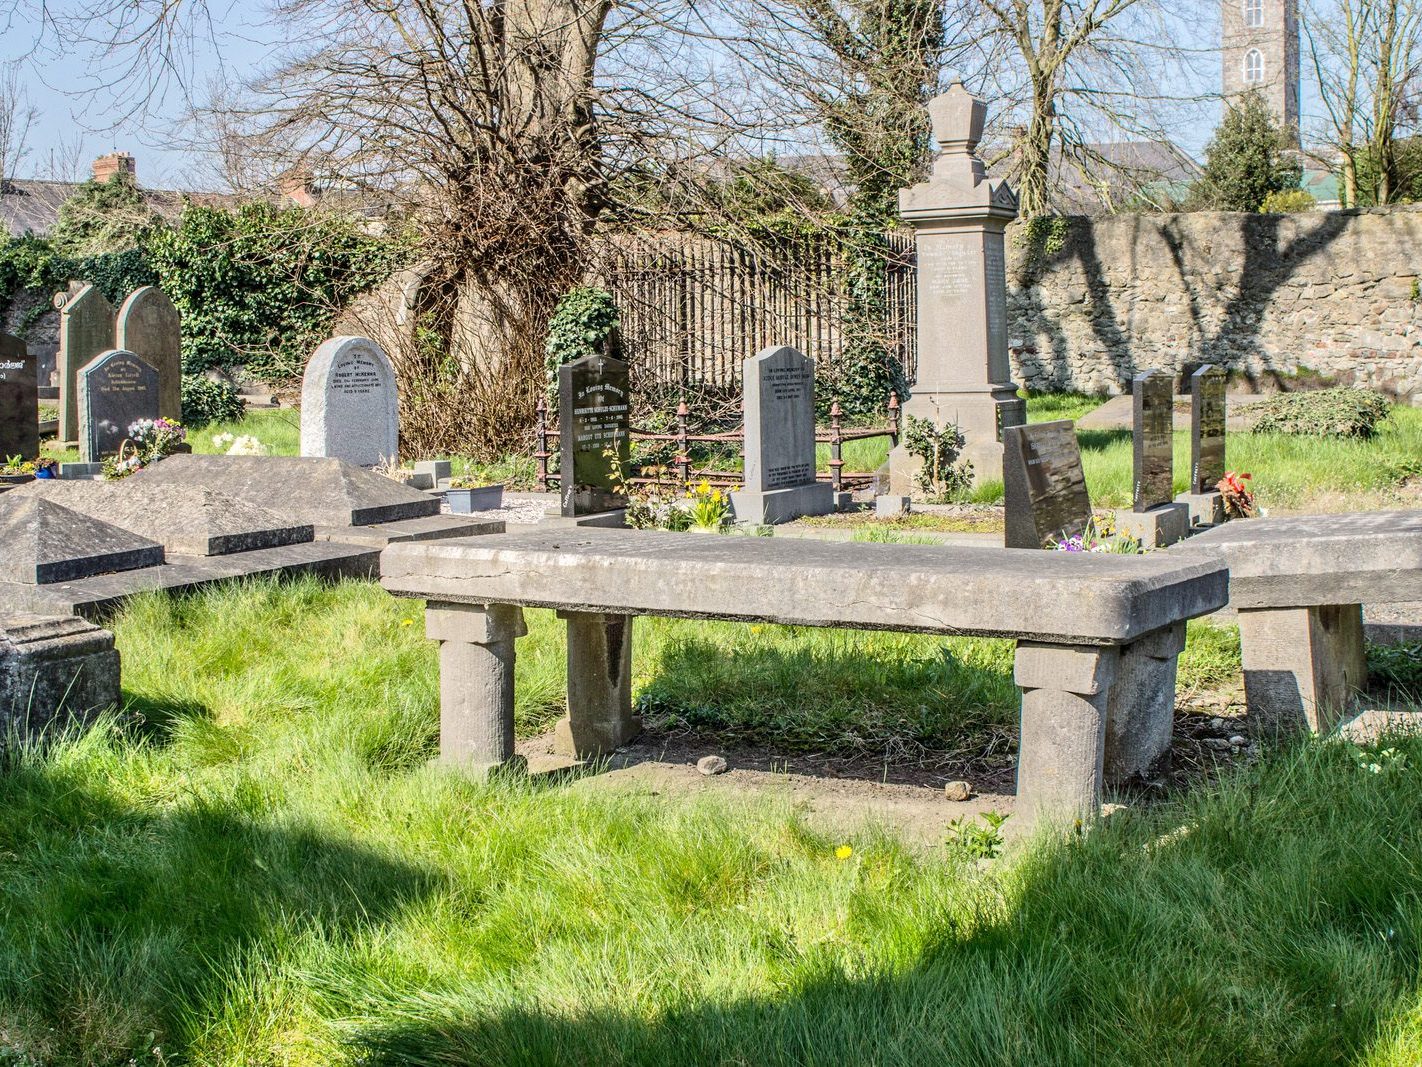 SOME OLD IMAGES OF ST PETERS CHURCHYARD IN DROGHEDA [PHOTOGRAPHED 20212]-224215-1